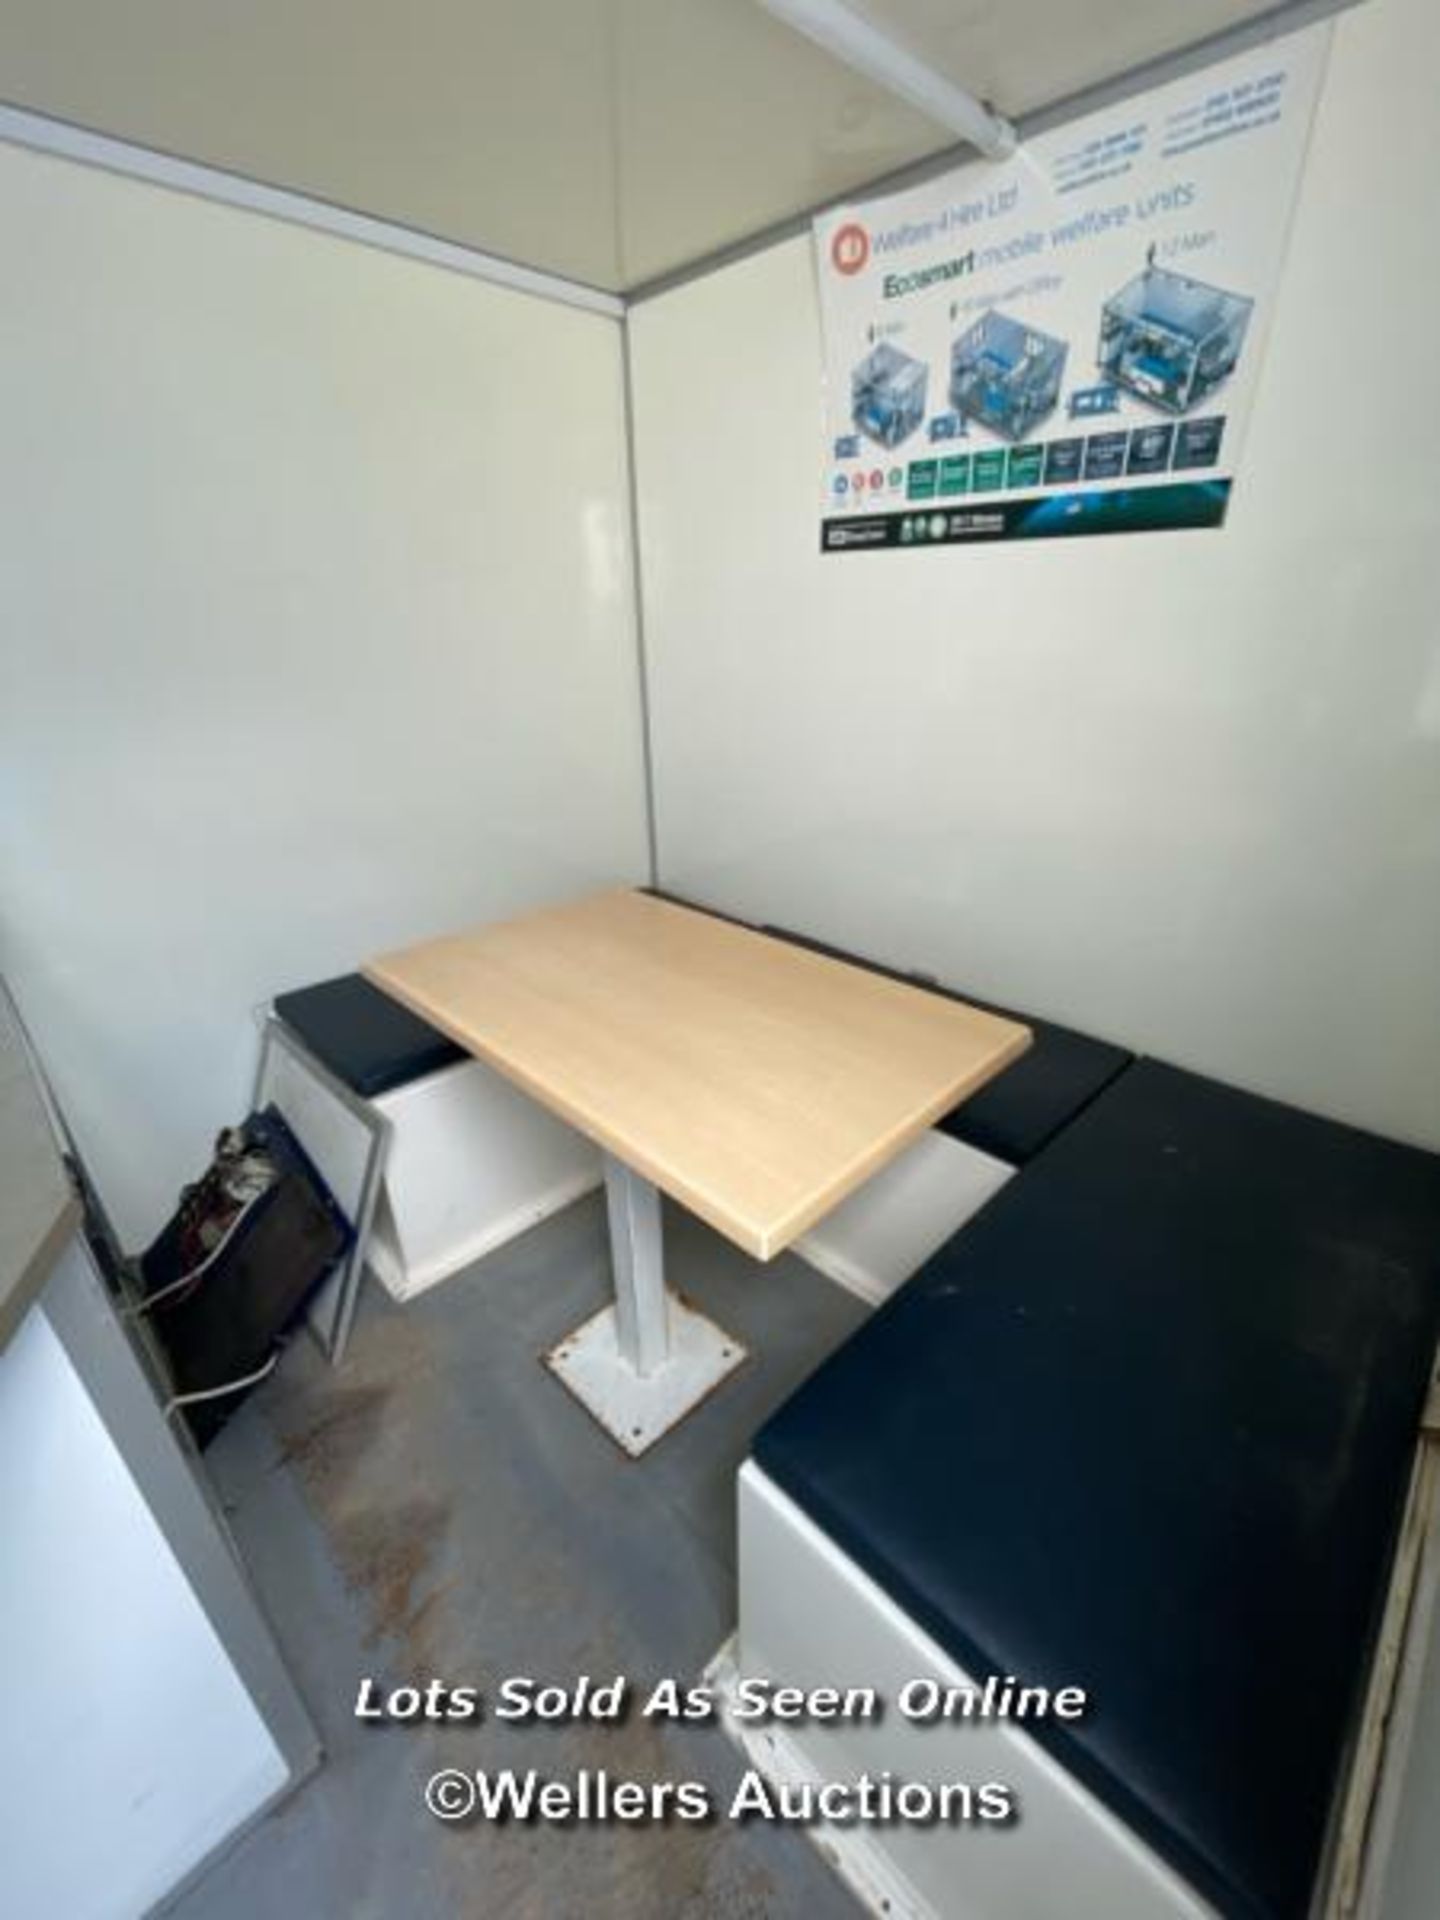 6 PERSON 12 X 7.5FT AJC EASY CABIN TOWABLE WELFARE UNIT, INCLUDES WASH BASIN, KETTLE, MICROWAVE, - Image 7 of 20